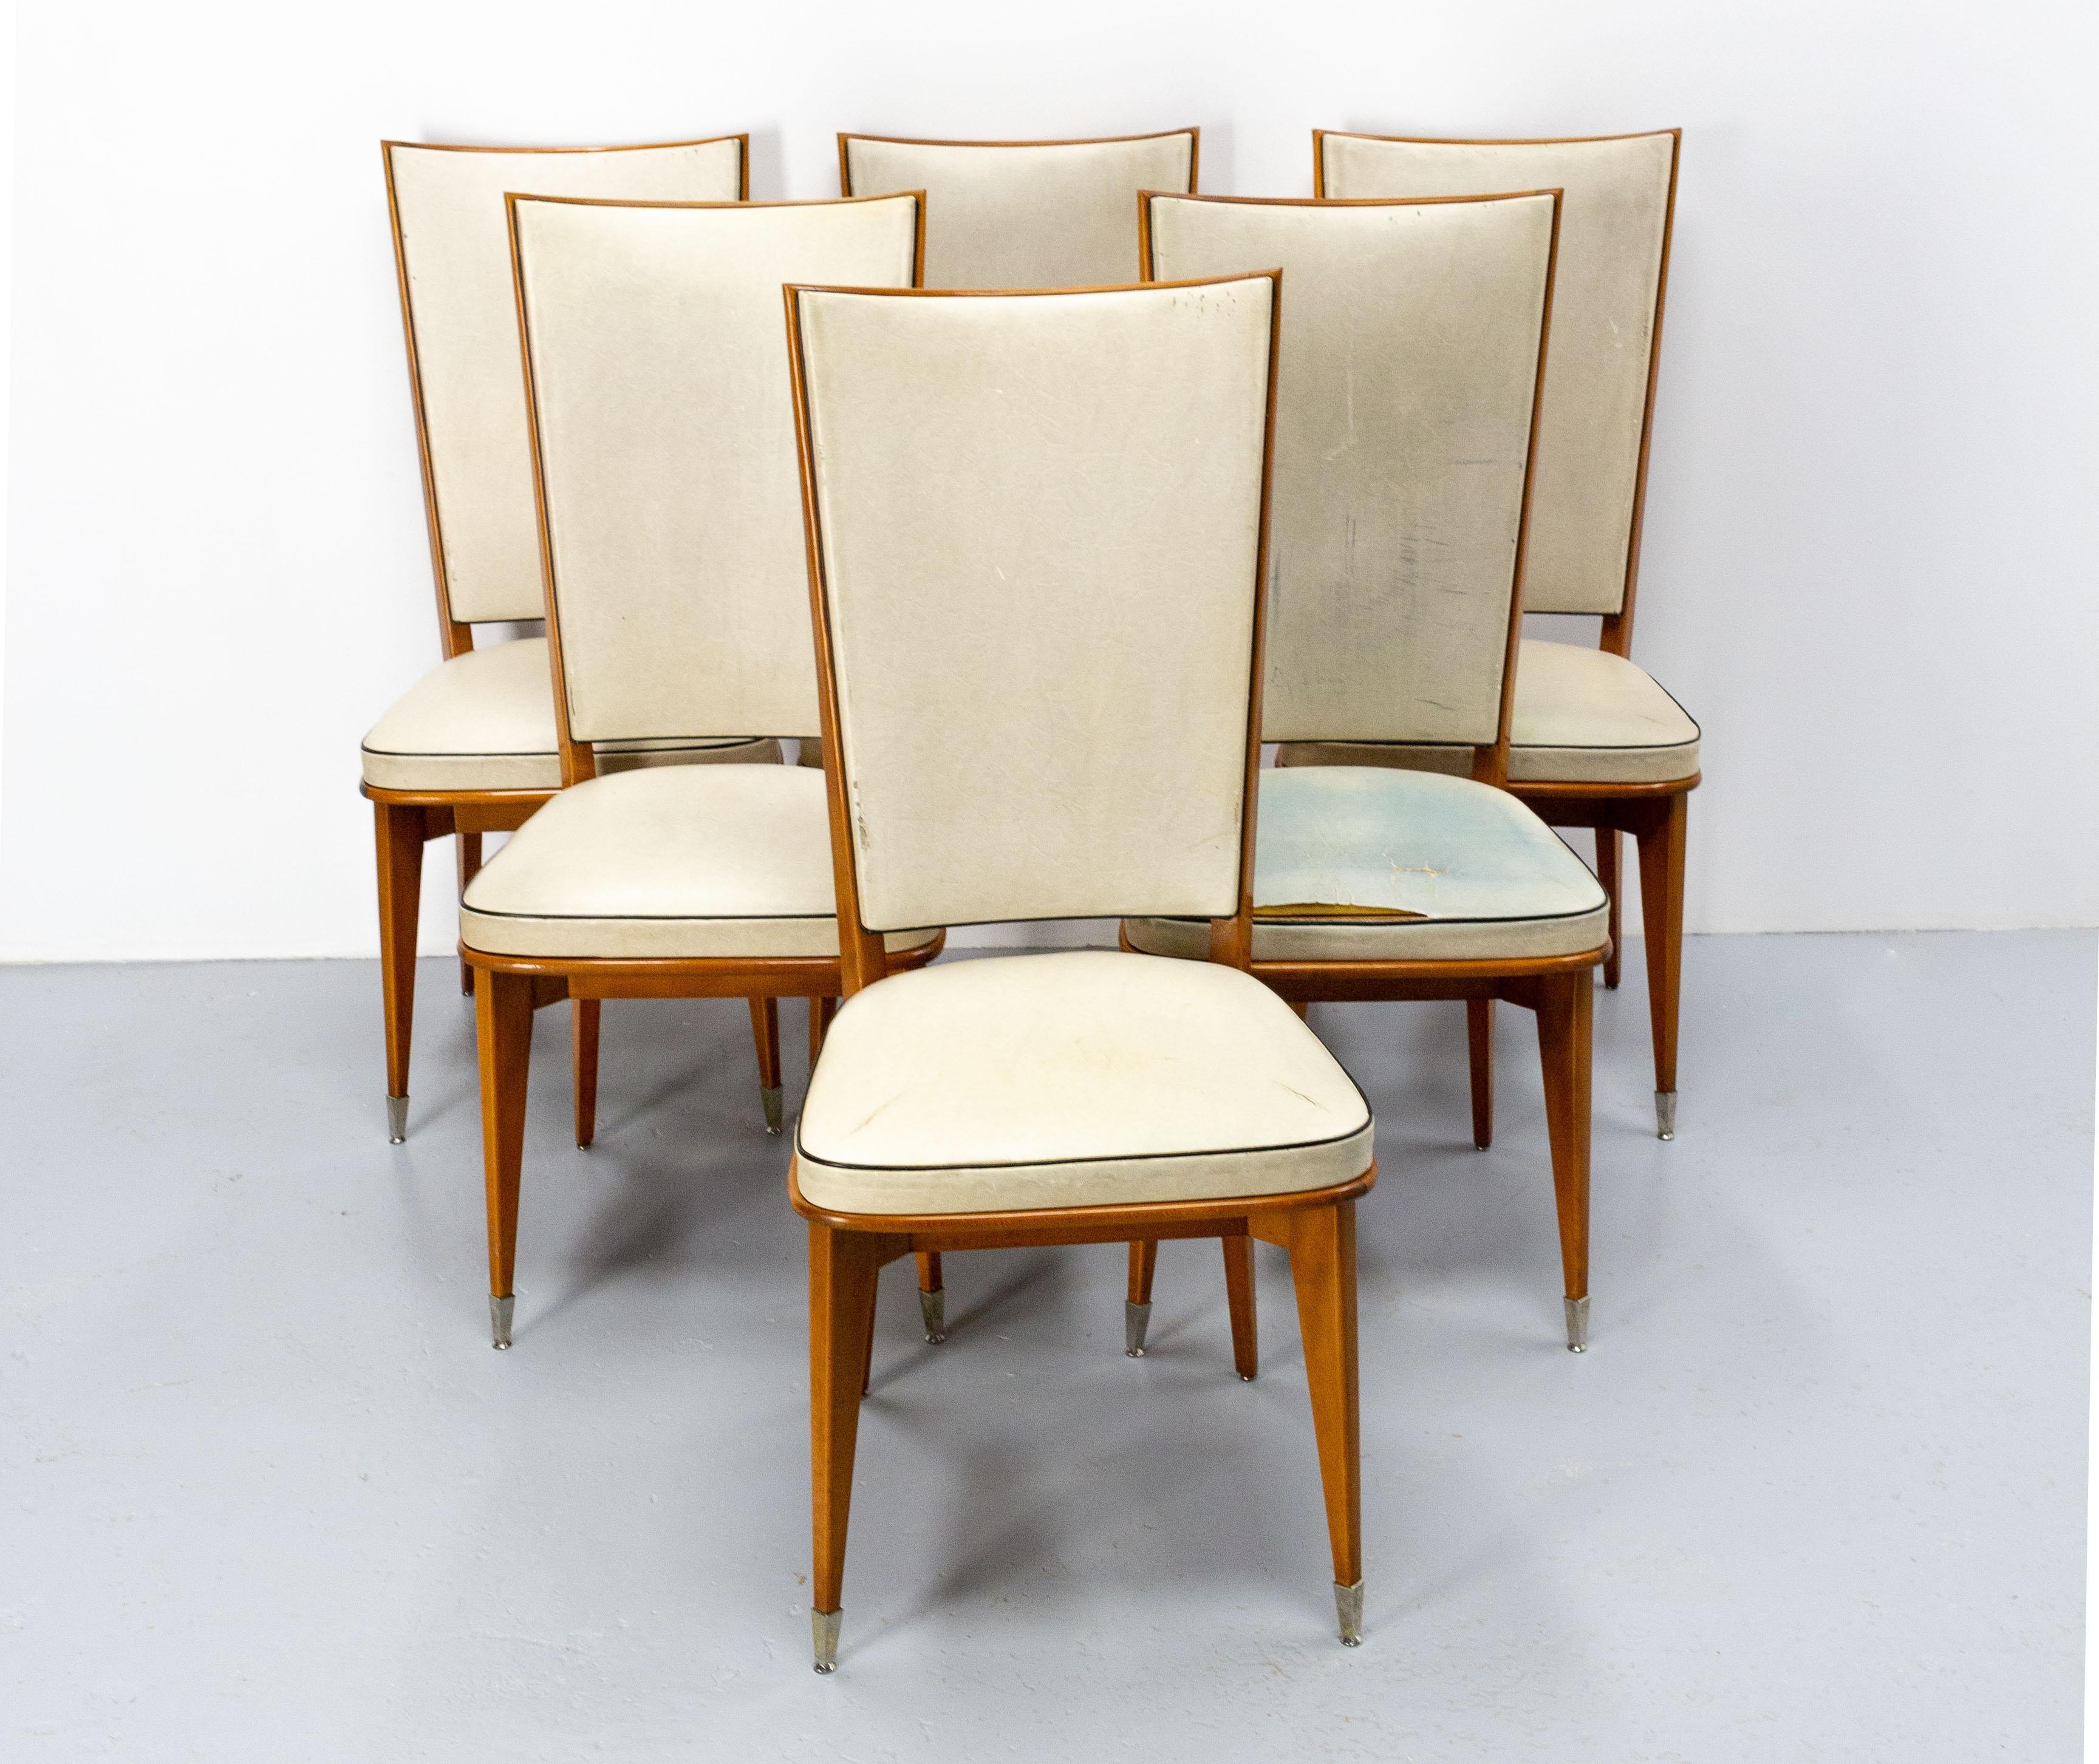 Set of six French dining chairs circa 1950 
Skai and beech to recover
In good condition solid and sound 
We can offer you a quote to redo the cover.

Shipping:
L 137 P 66 H102 53.2 kg.